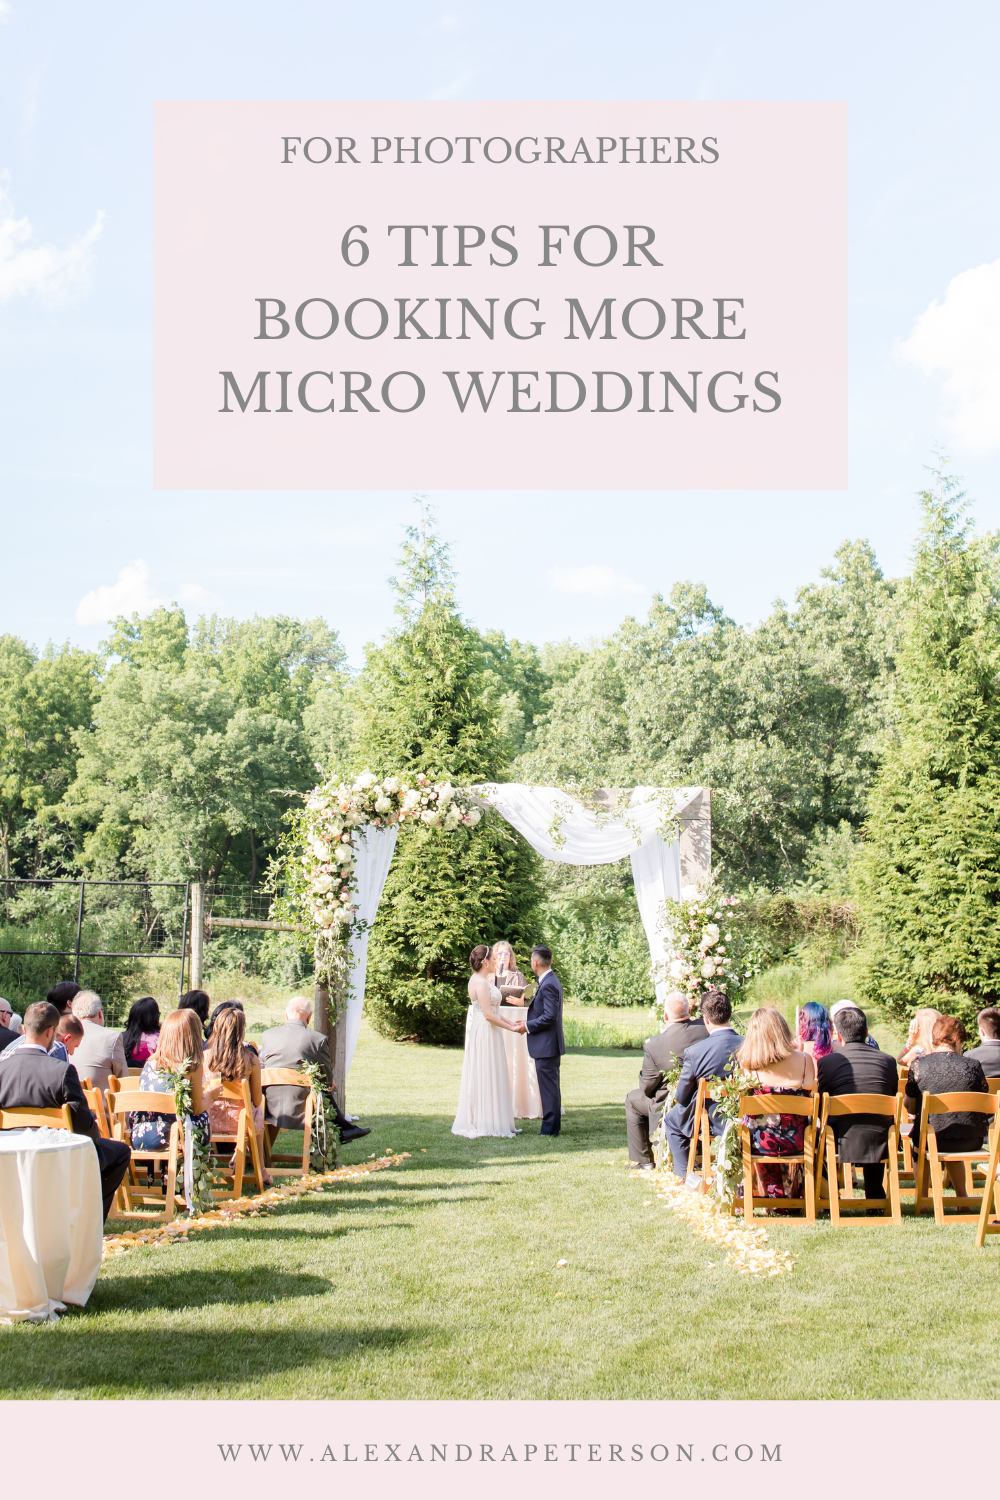 6 Tips for Booking More Micro Weddings by Alexandra Peterson